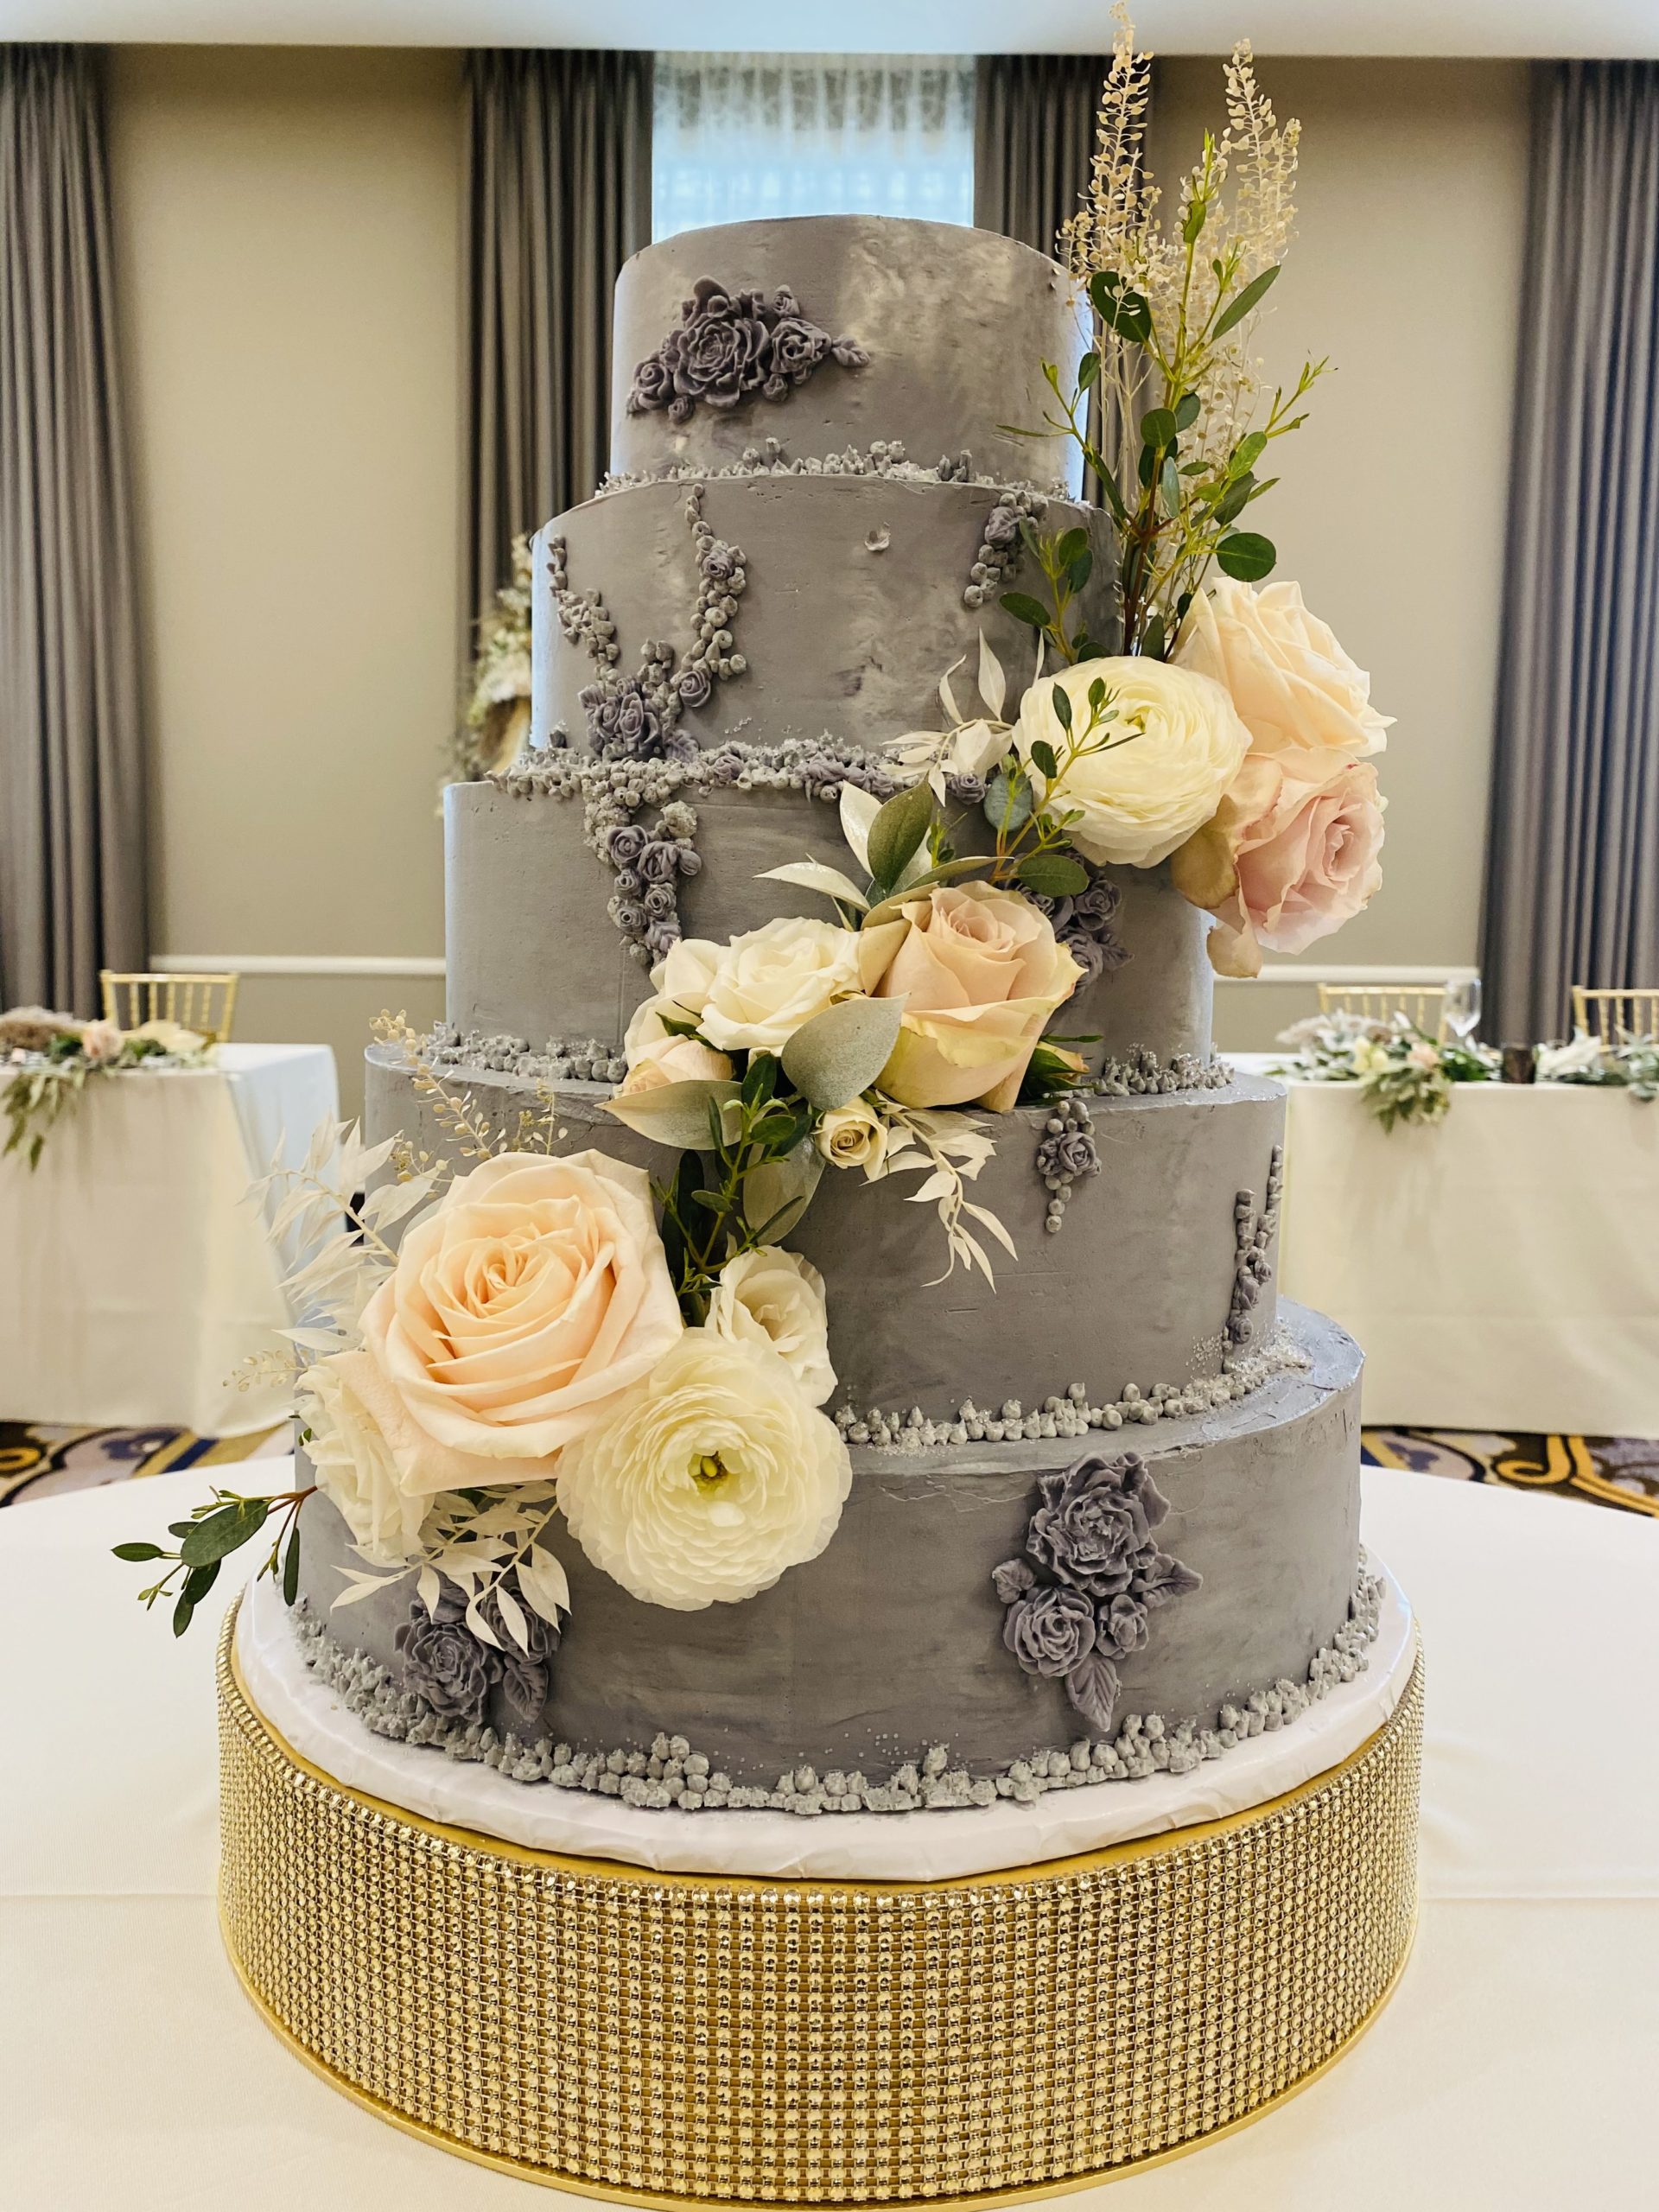 A beautiful 5-tier custom wedding cake in mauve buttercream with intricate frosted flowers and a live floral spray from Village Patisserie in Toledo, Ohio